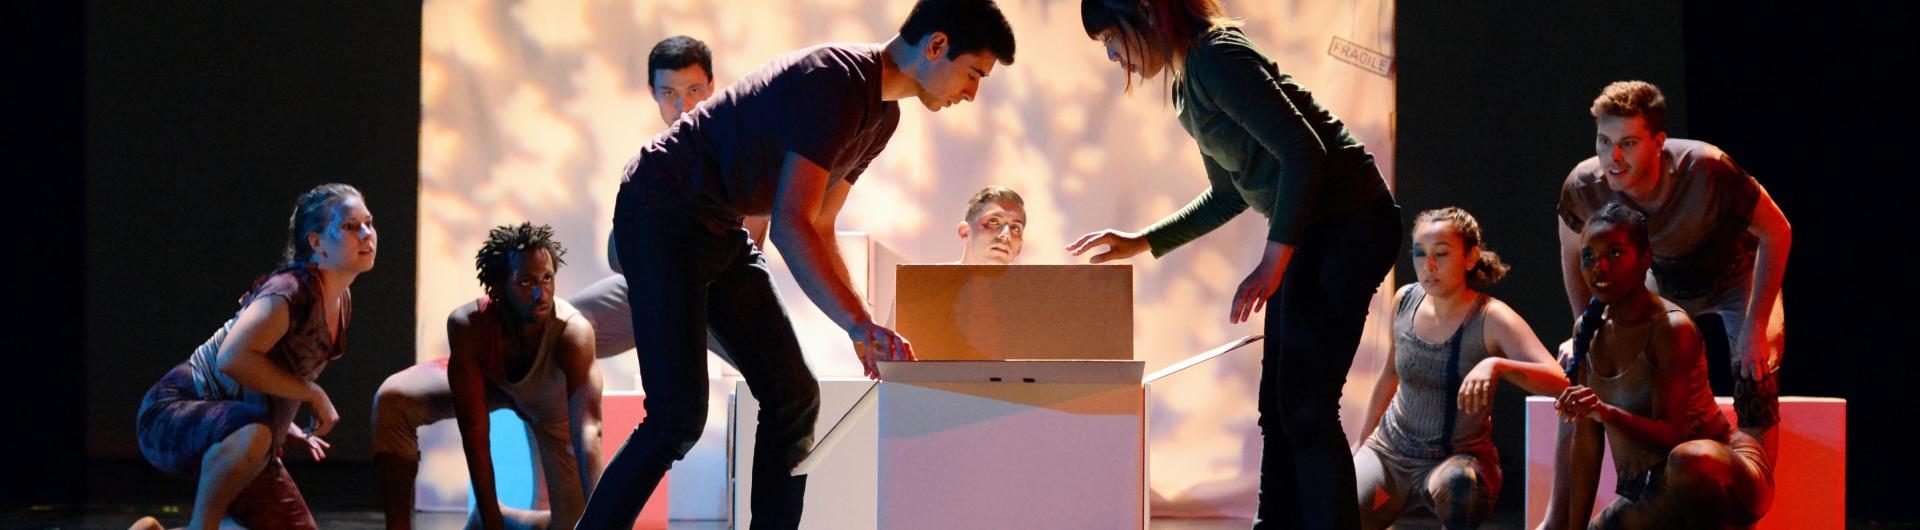 On stage, two actors look into an open box. An ensemble surrounds them.